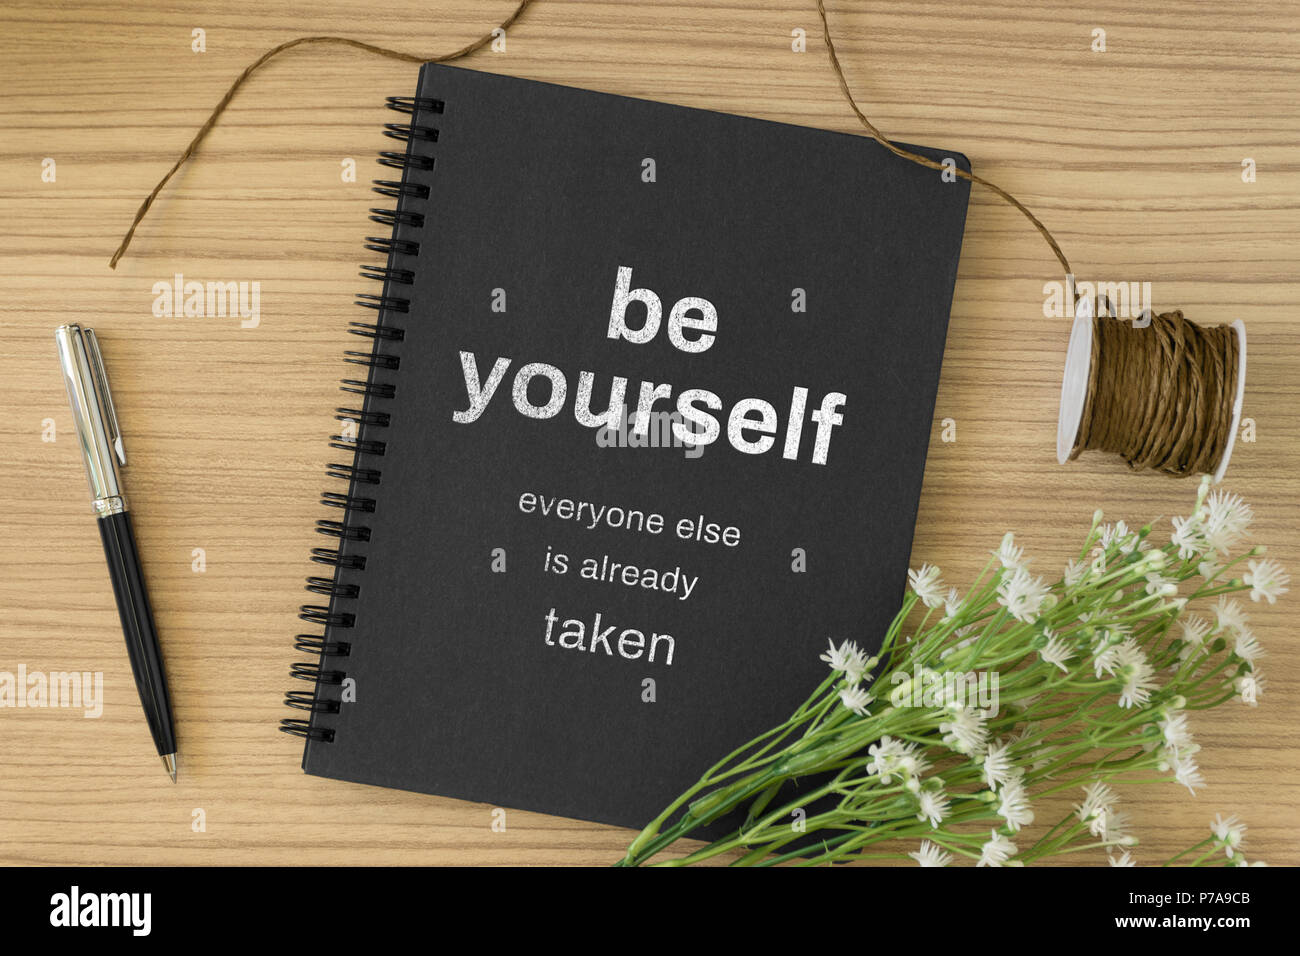 Notebook With Motivational And Inspirational Wisdom Quote On Wood